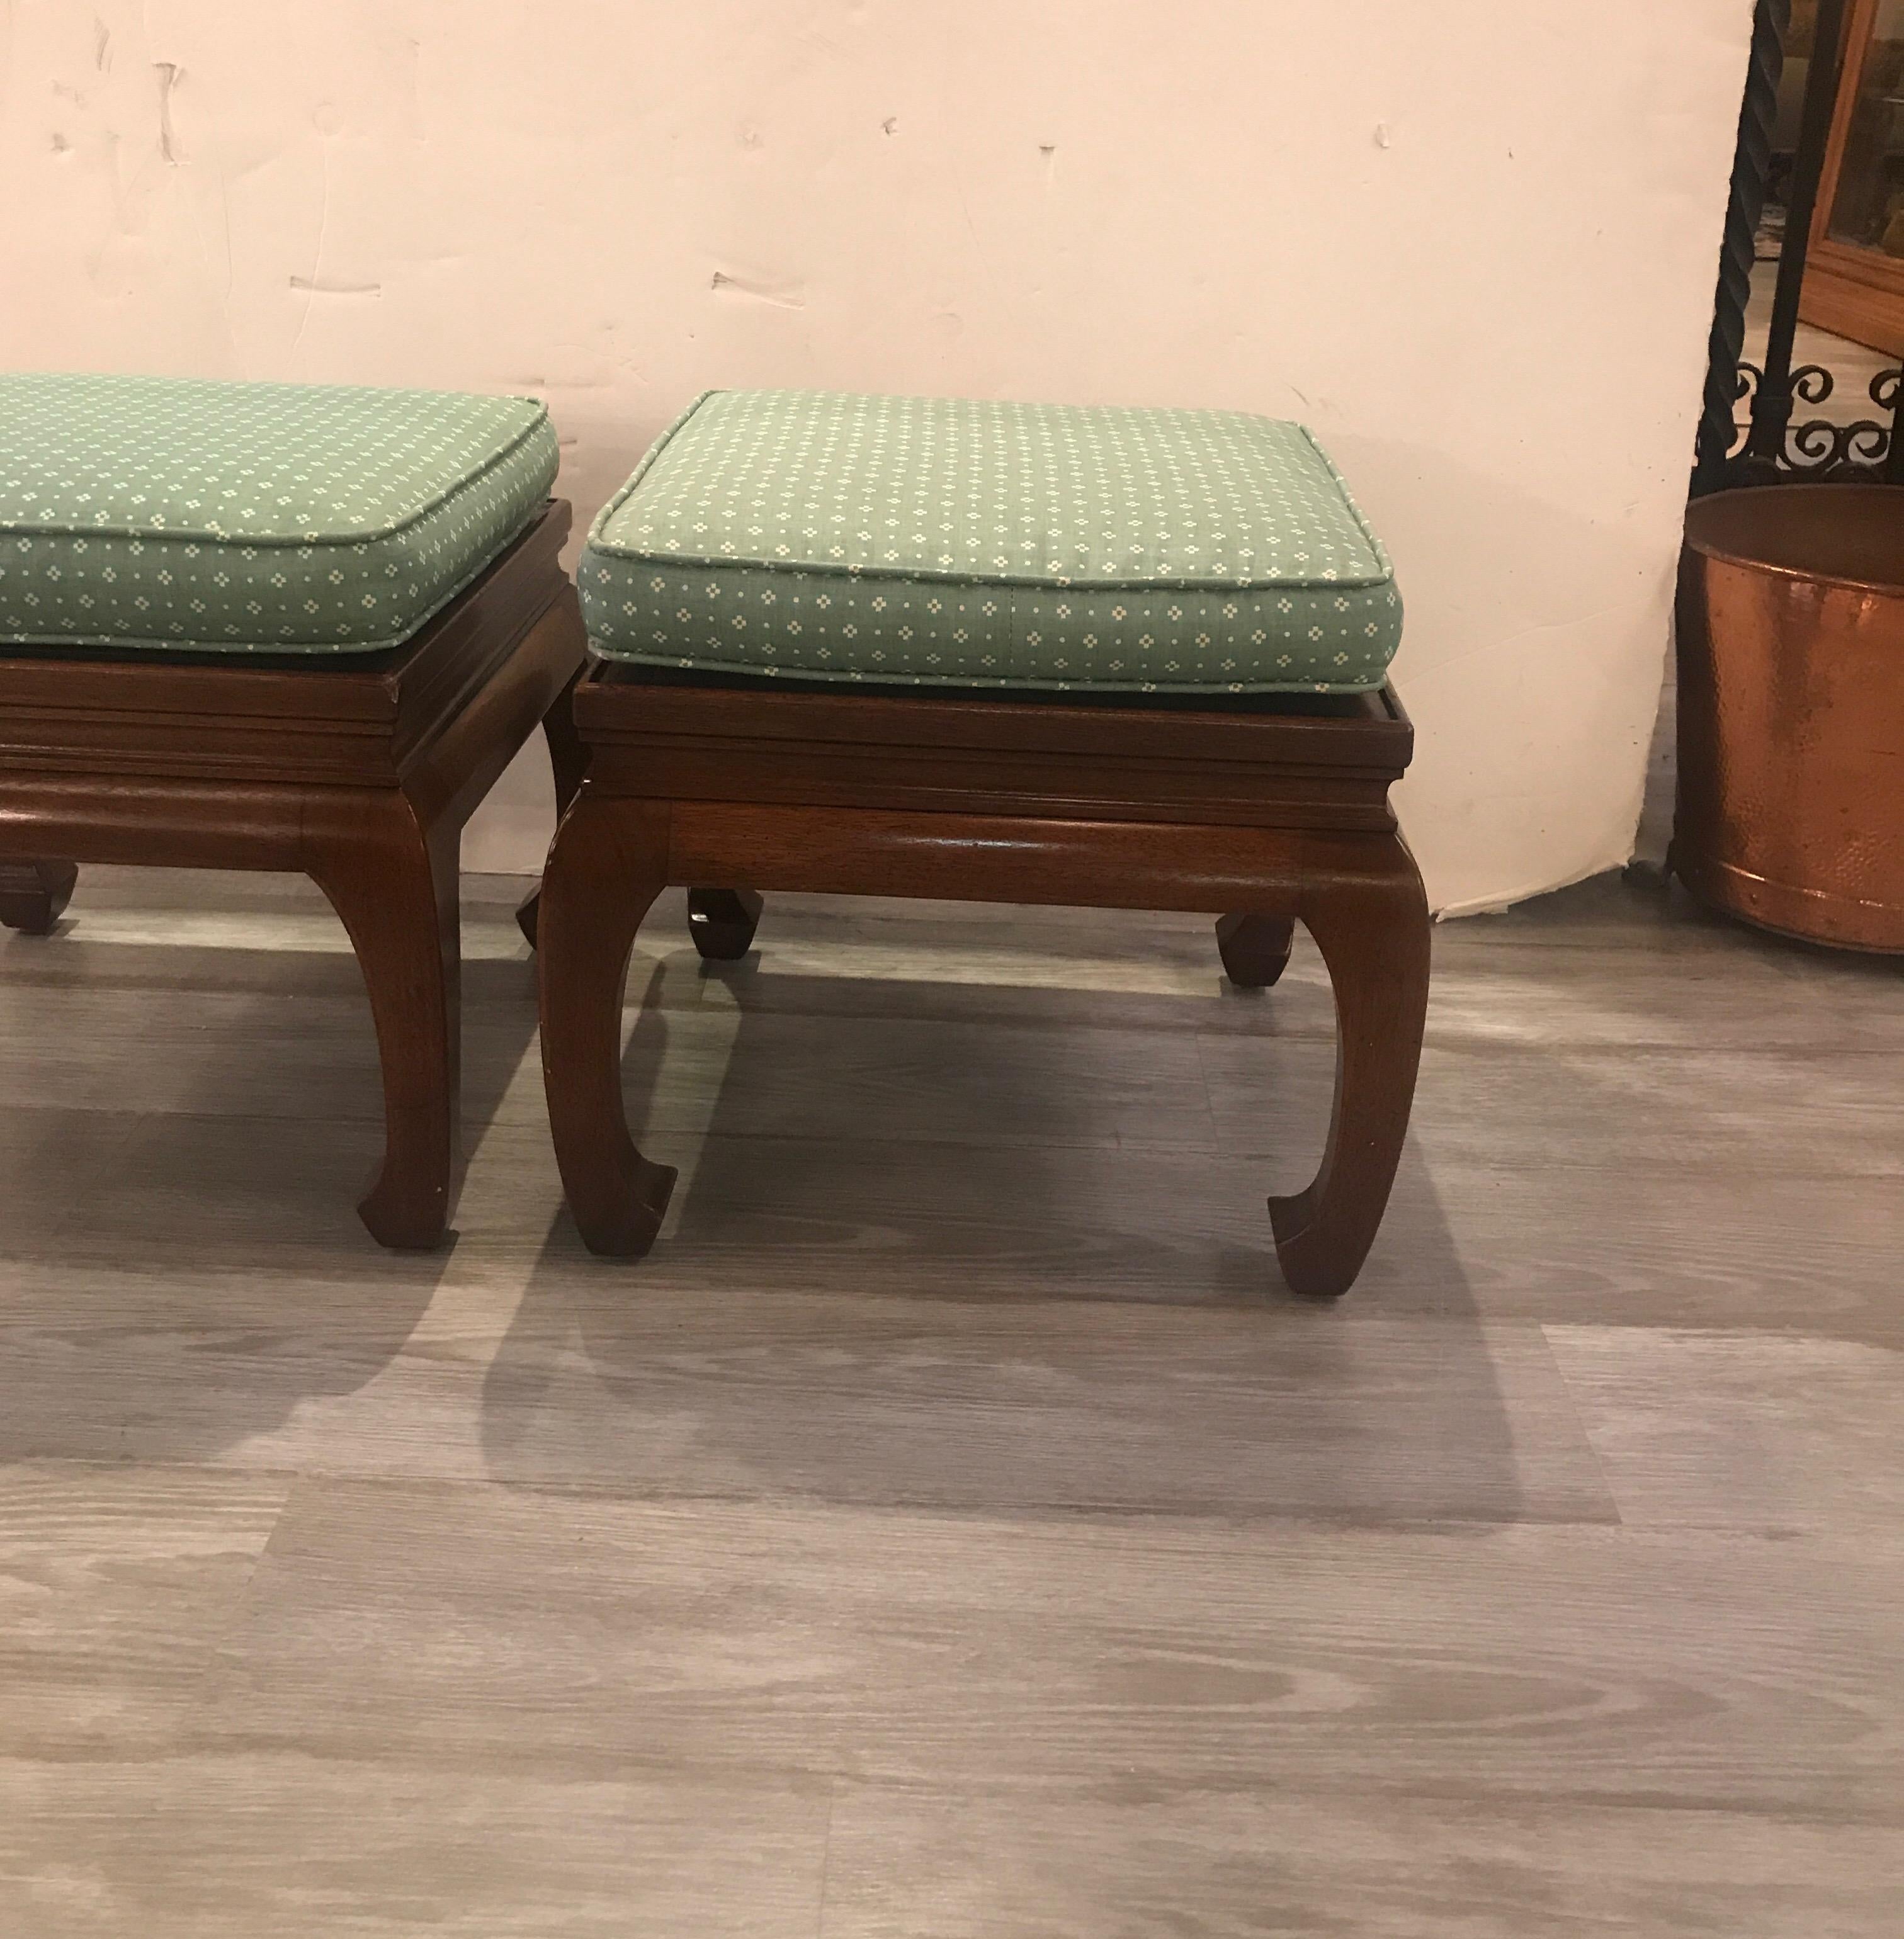 Pair of Asian Style Benches or Stands (Hollywood Regency)